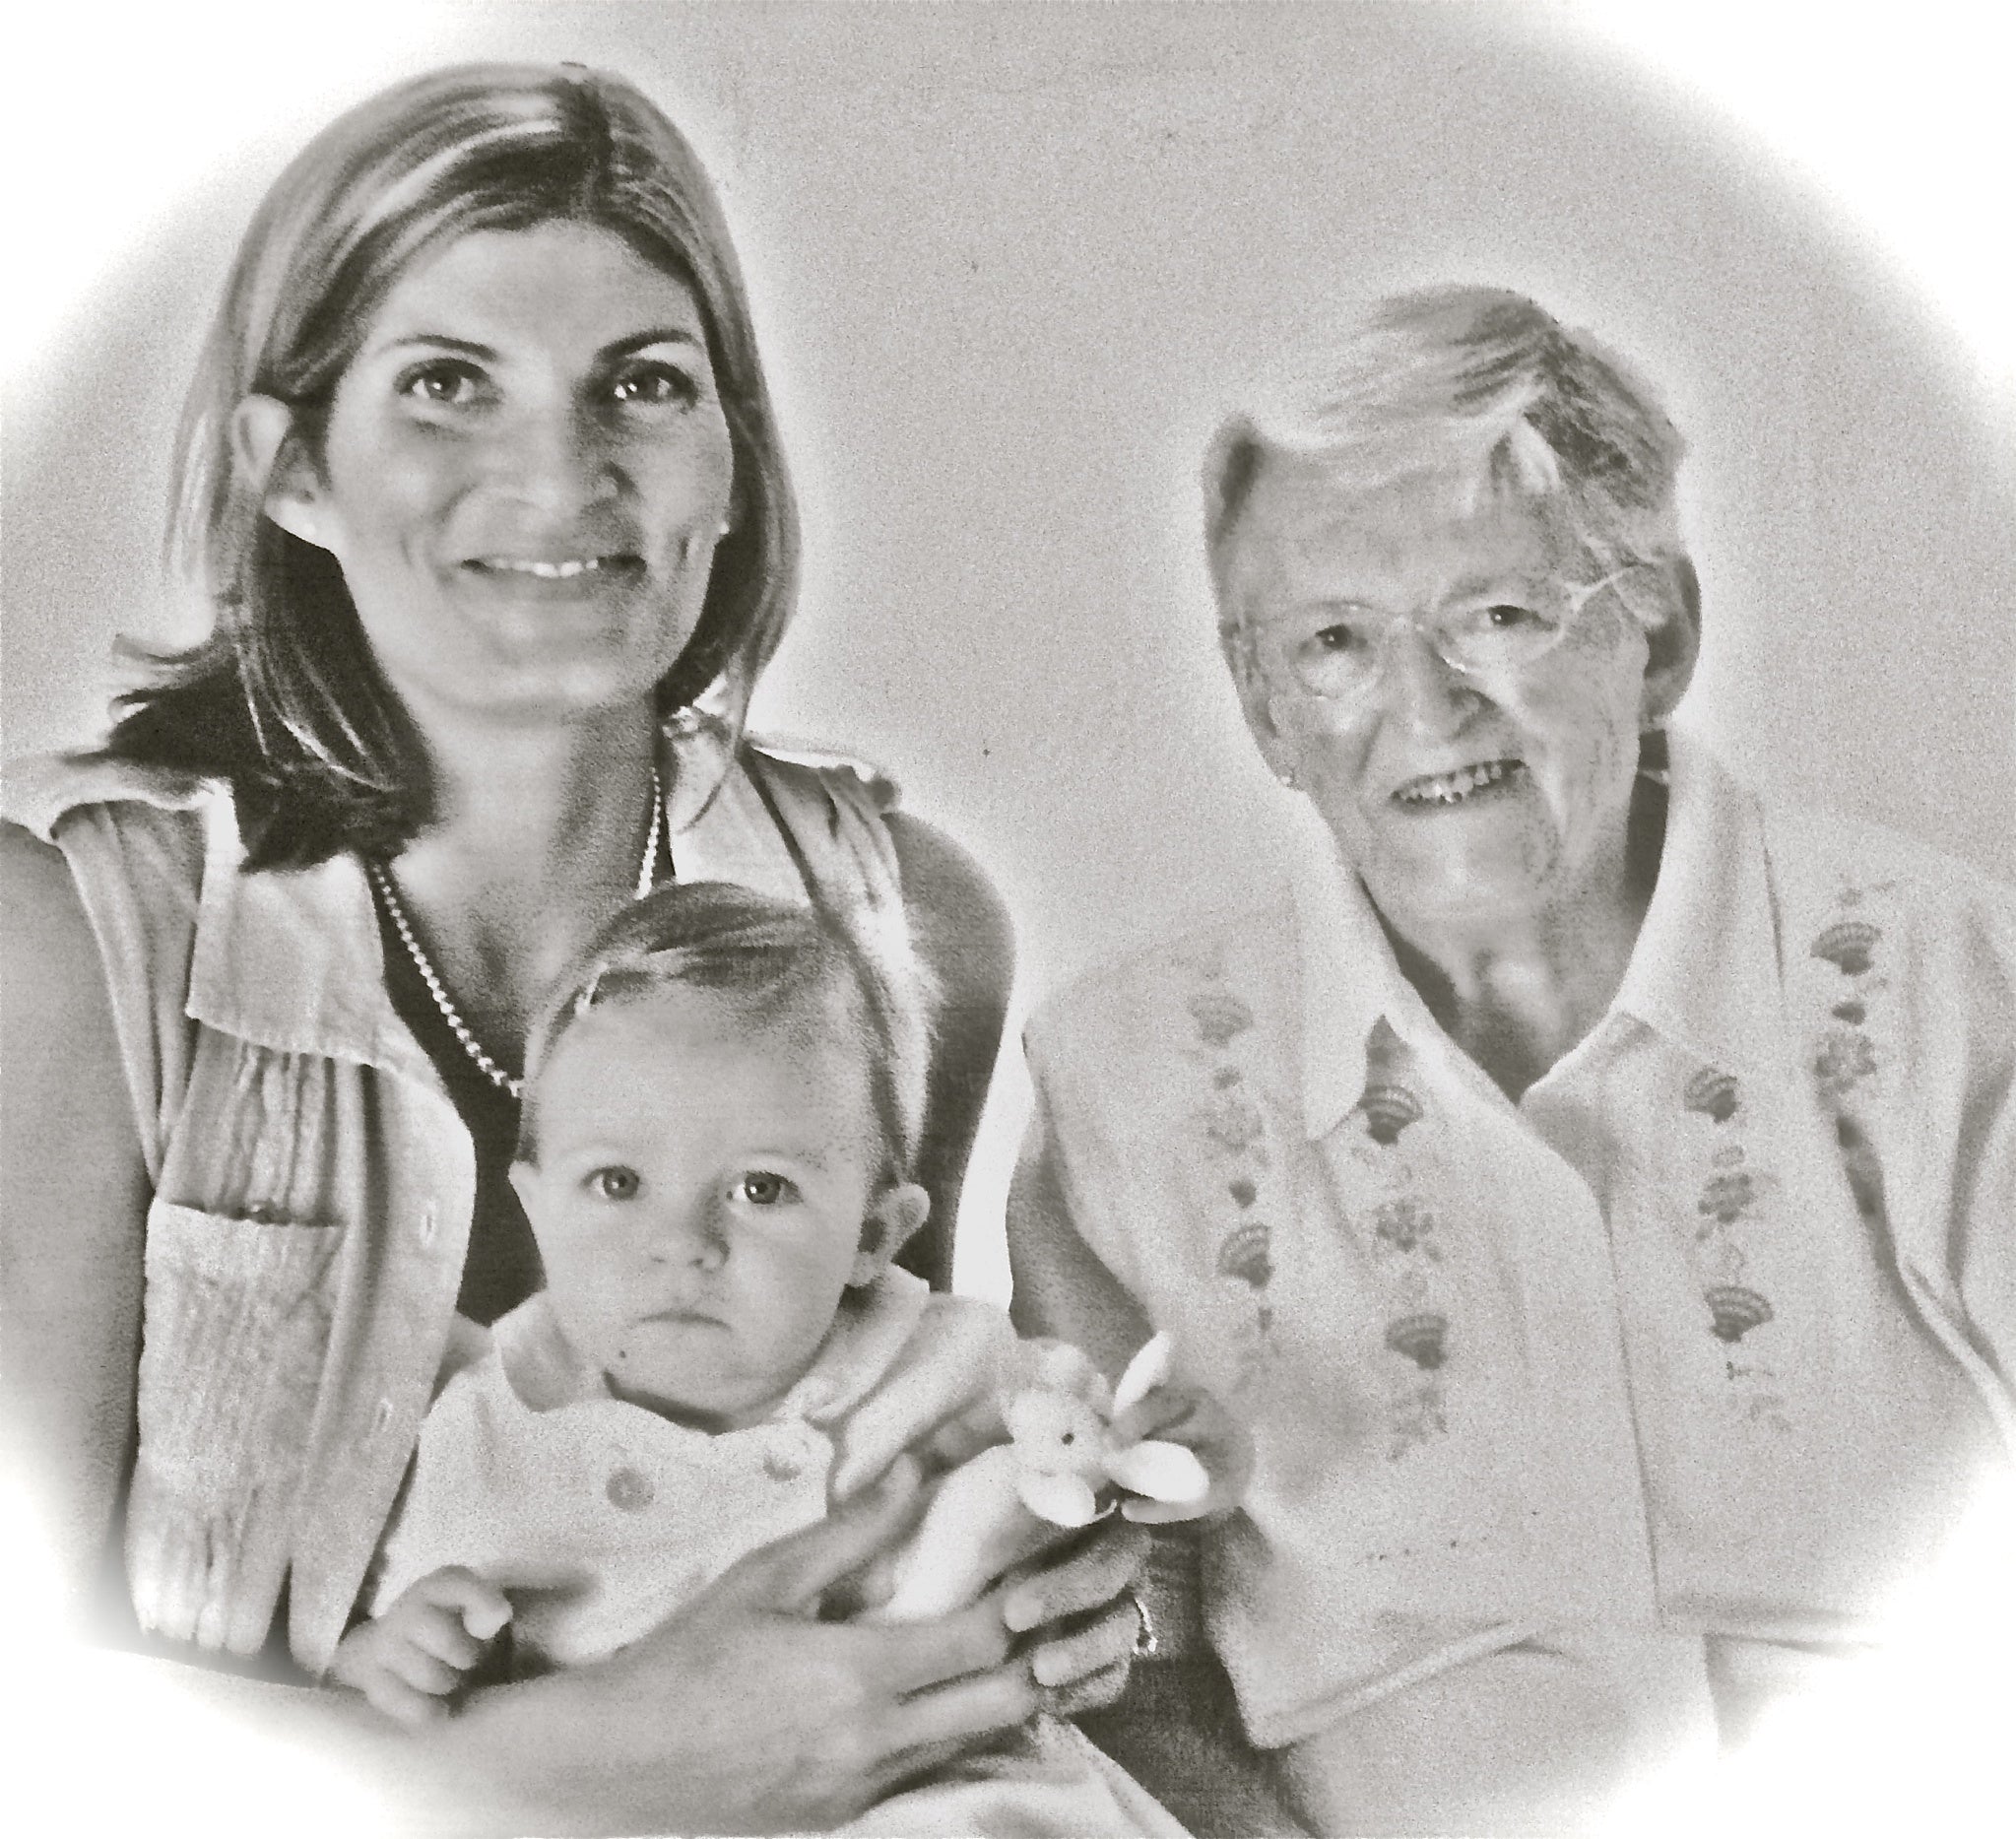 My grandmother, my daughter and me. September 2005.